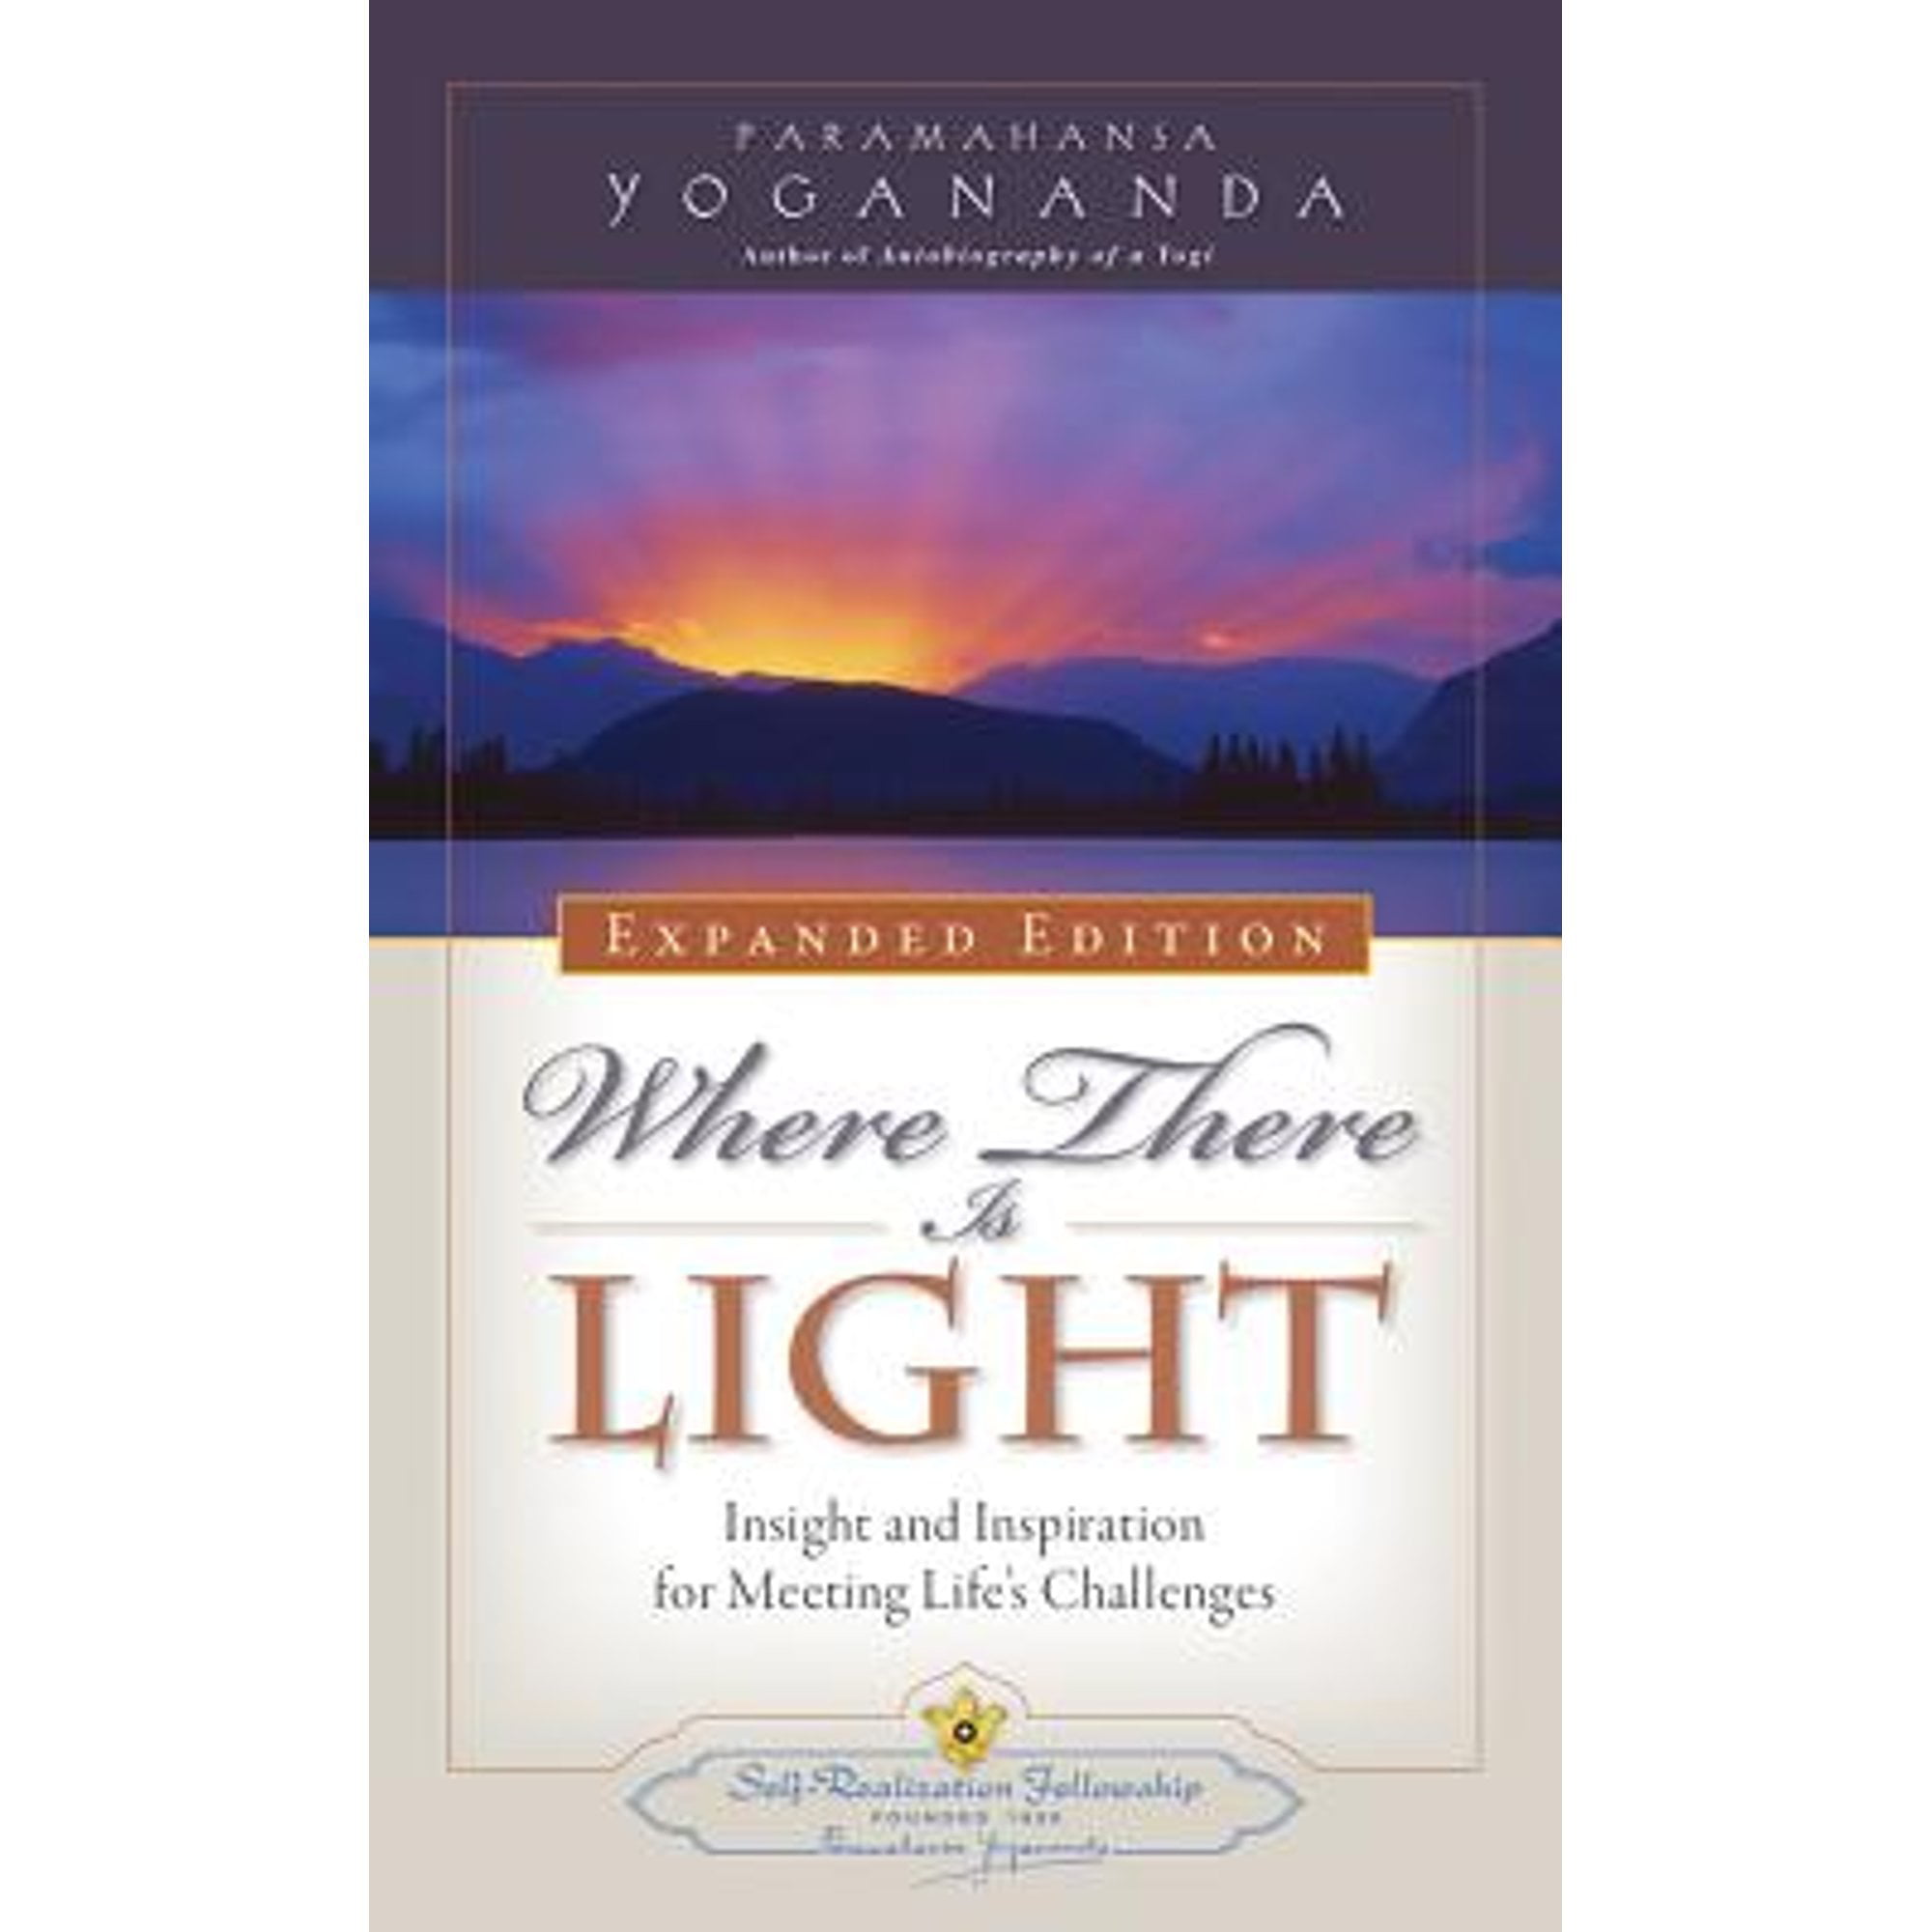 Pre-Owned Where There Is Light: Insight and Inspiration for Meeting Life's Challenges (Paperback 9780876127209) by Paramahansa Yogananda